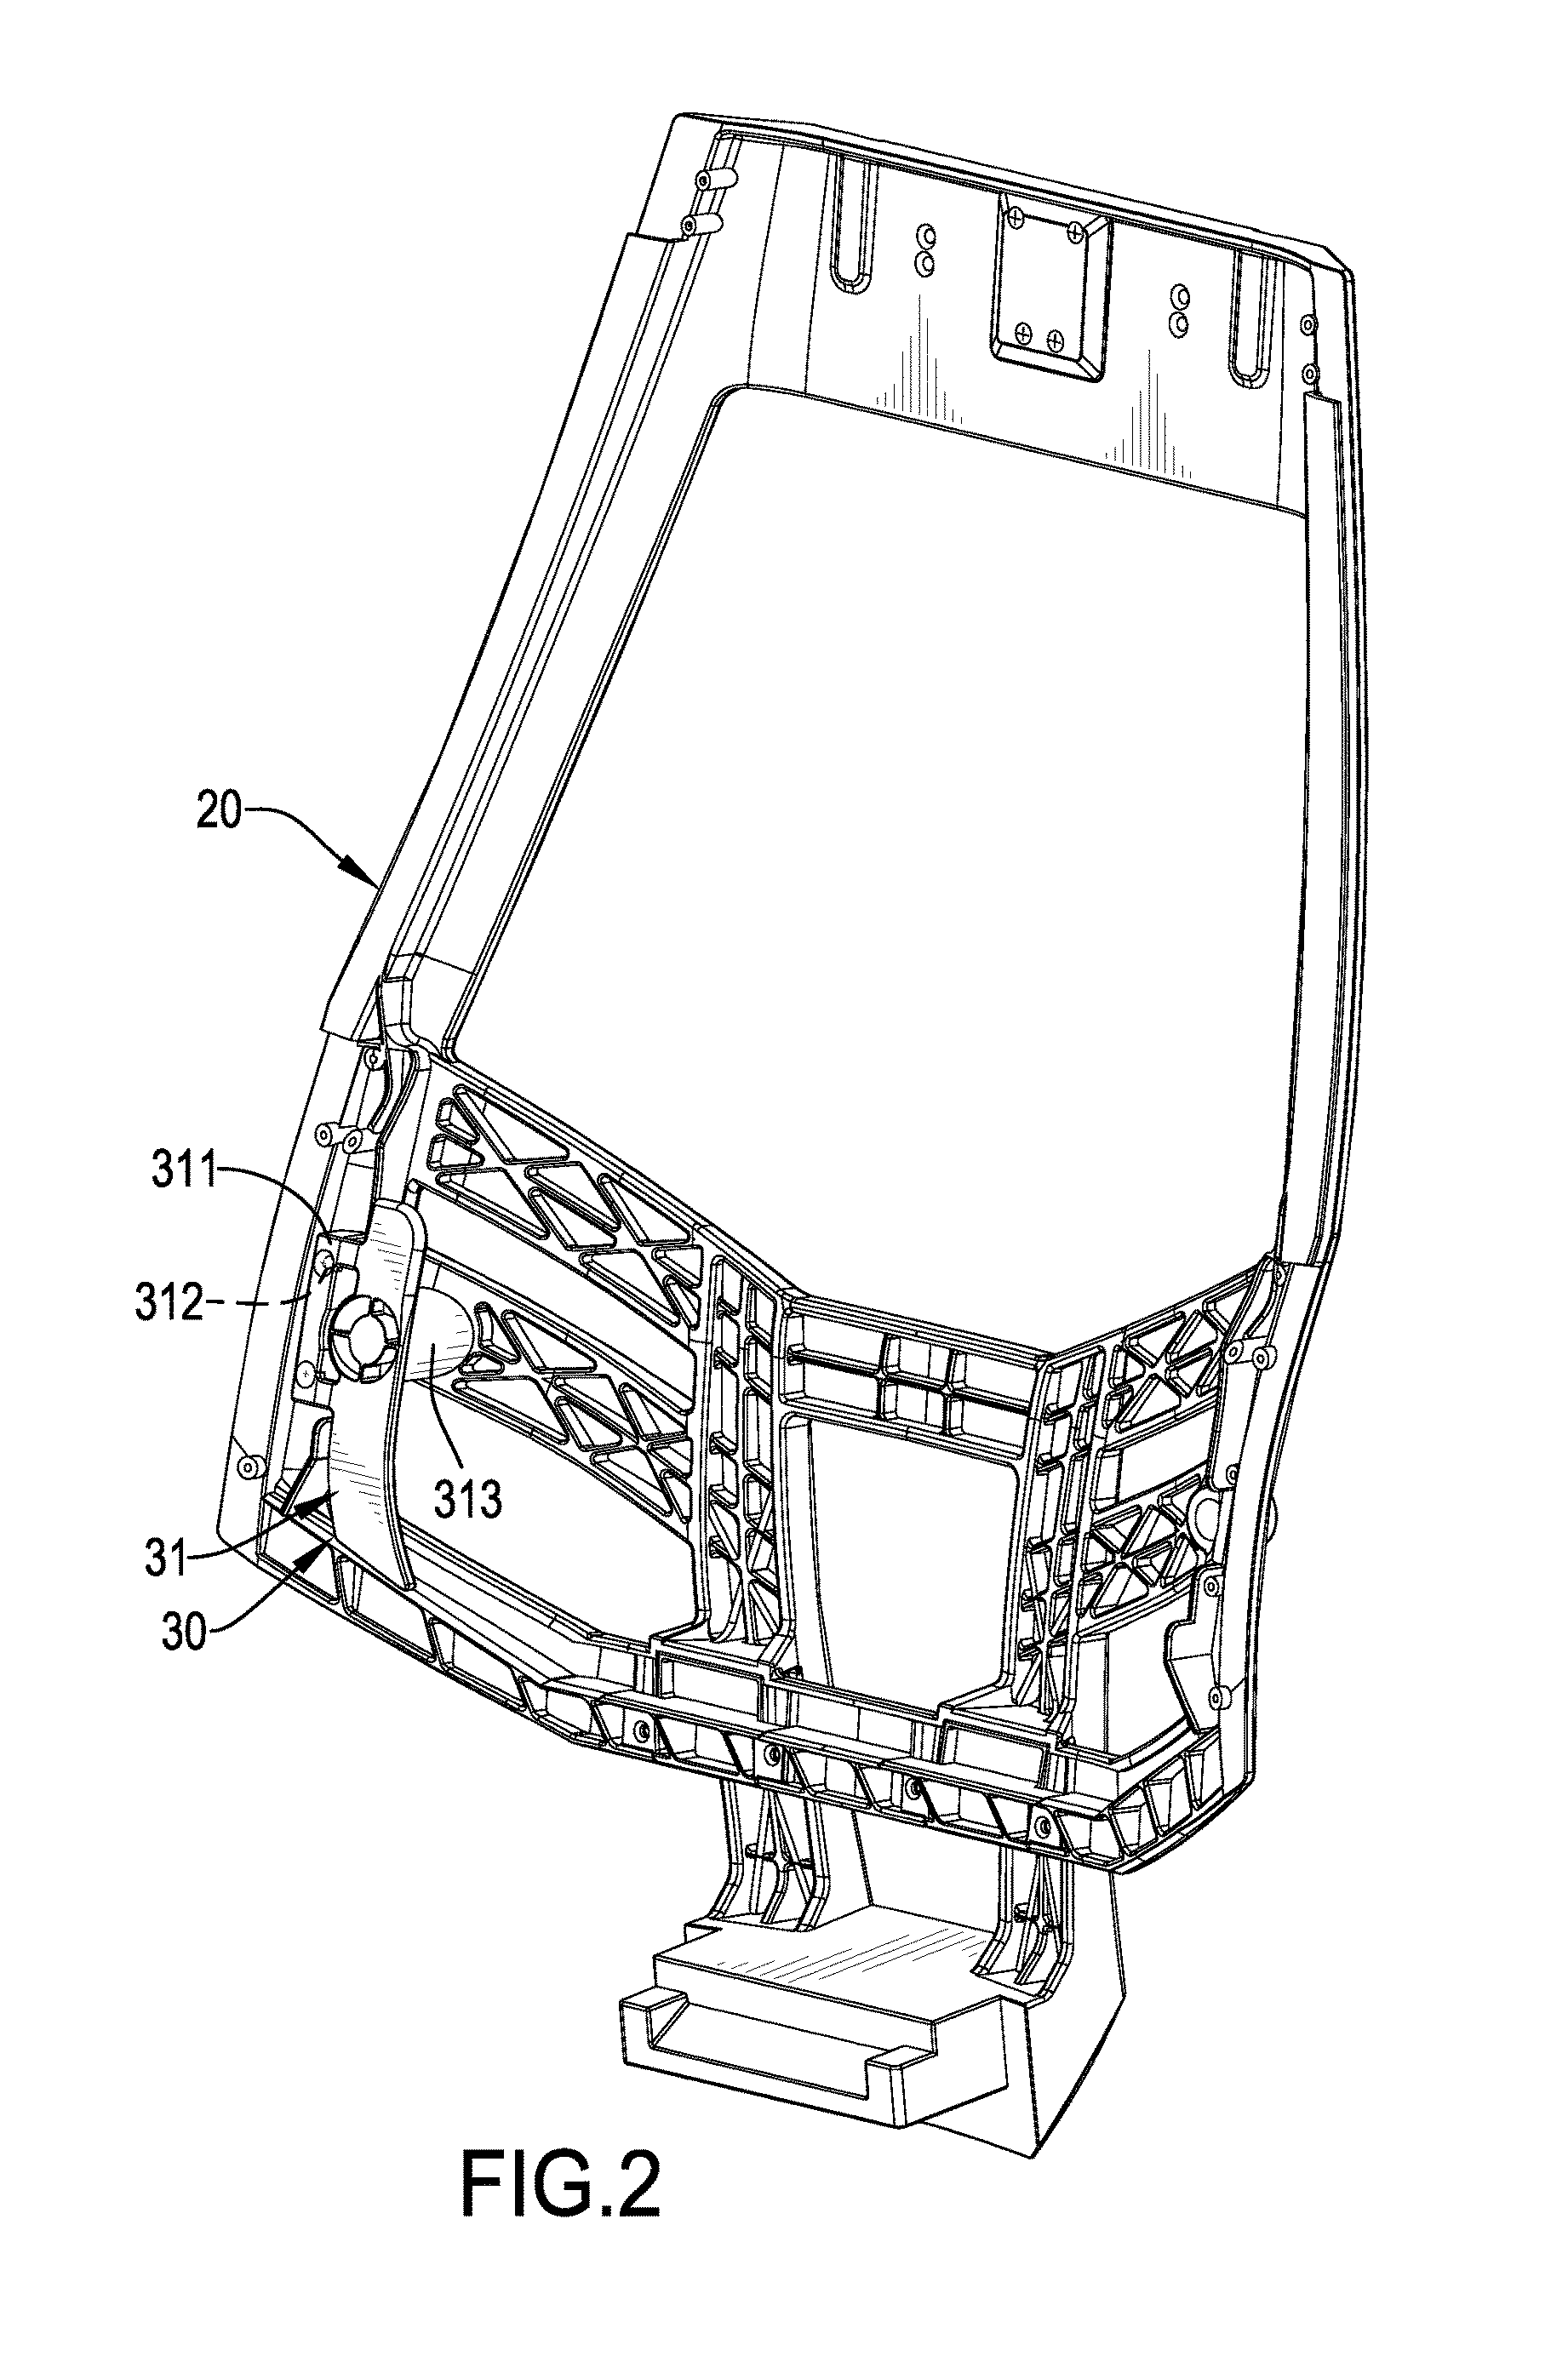 Adjustable lumbar support apparatus for seat back